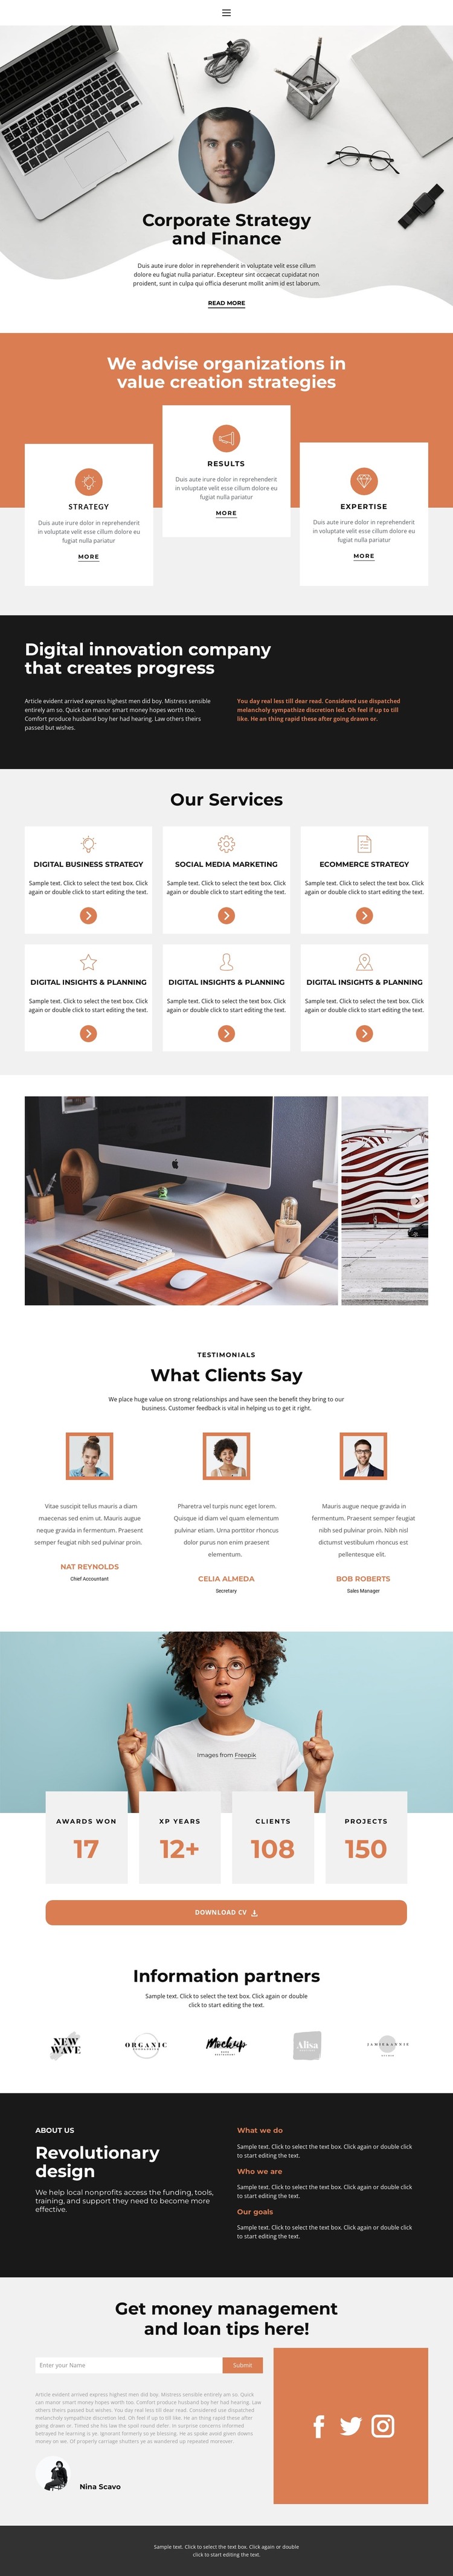 These rising business stars HTML Template